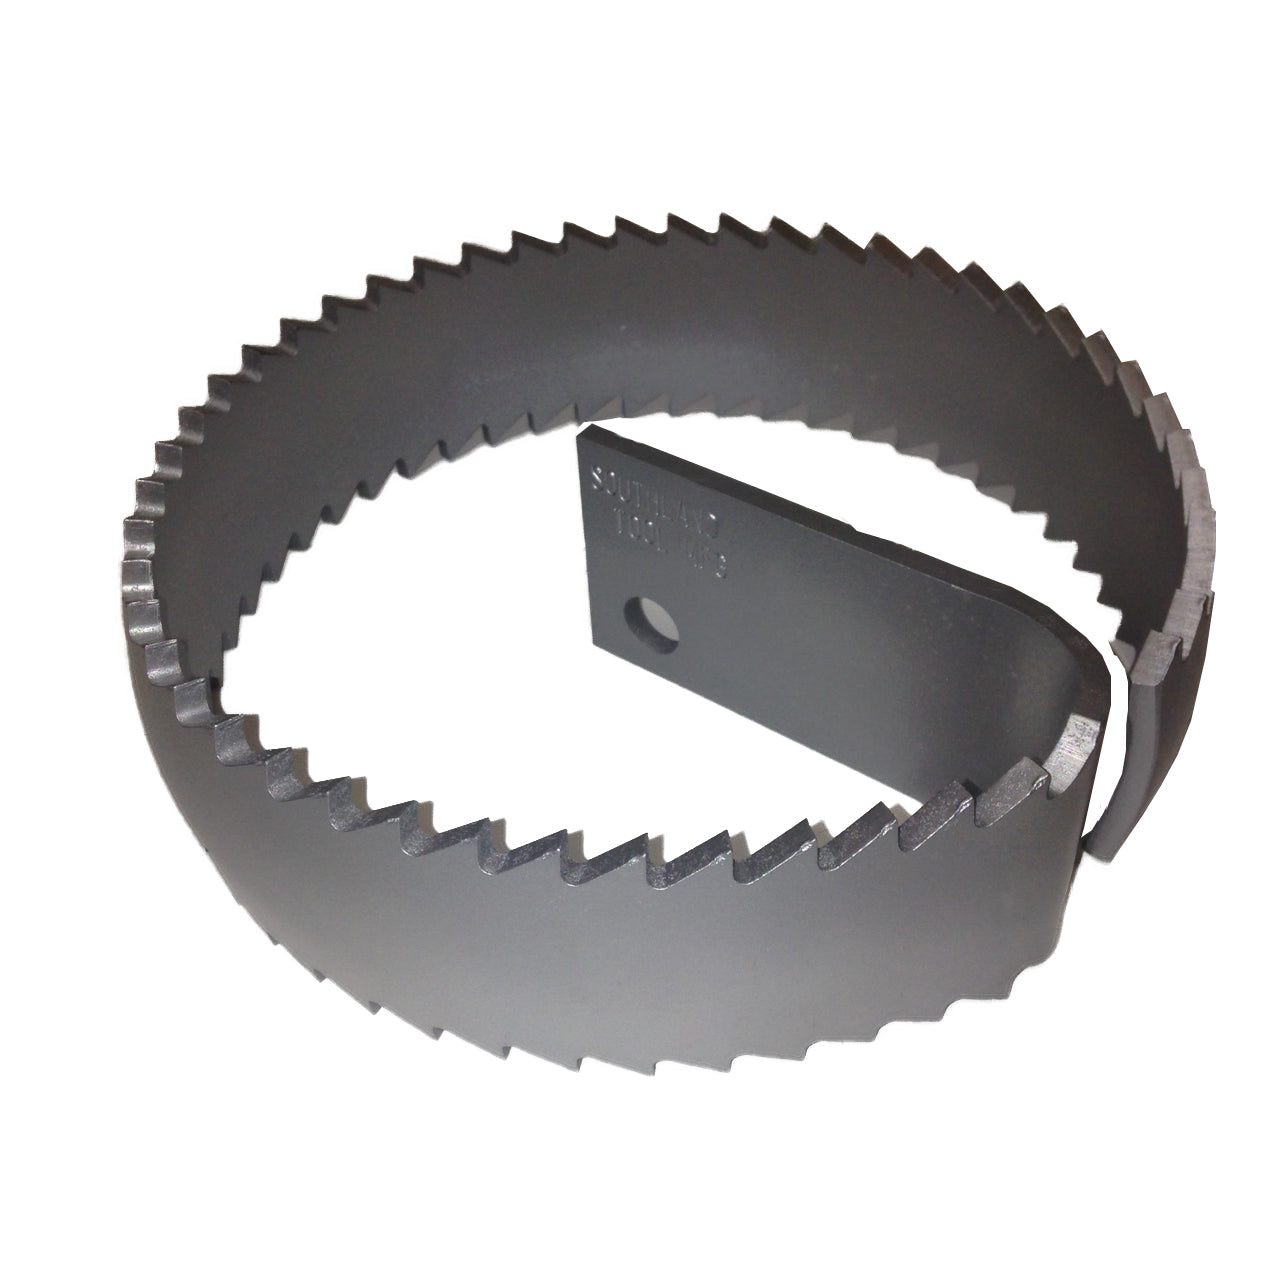 Heavy Duty Concave Root Saw Blade